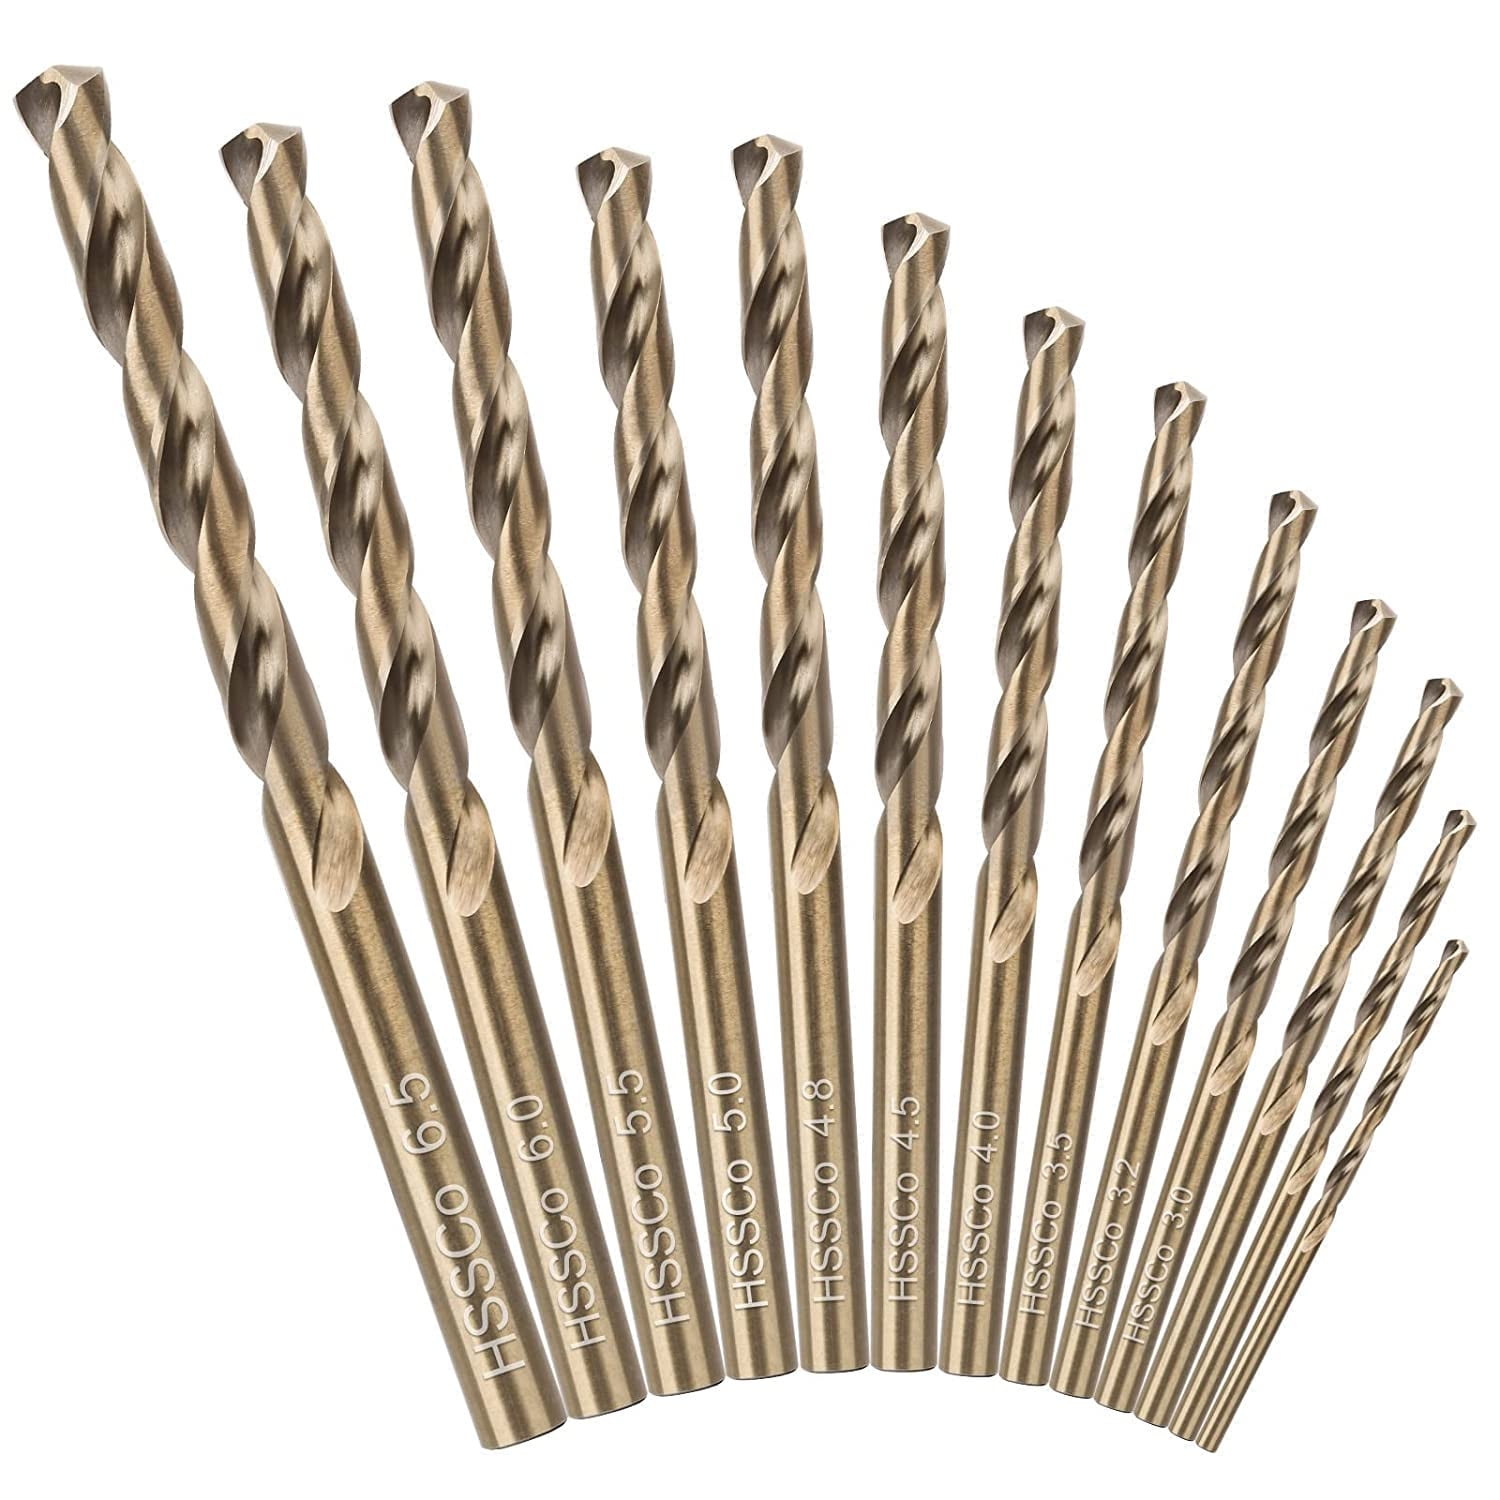 Router Bits,Woodworking Tool, Router Milling Bits .Hss,For Dremel Bits  Rotary Milling Cutter 1 Inch Shank Engraving Set; From Dropshipcenter,  $2.51